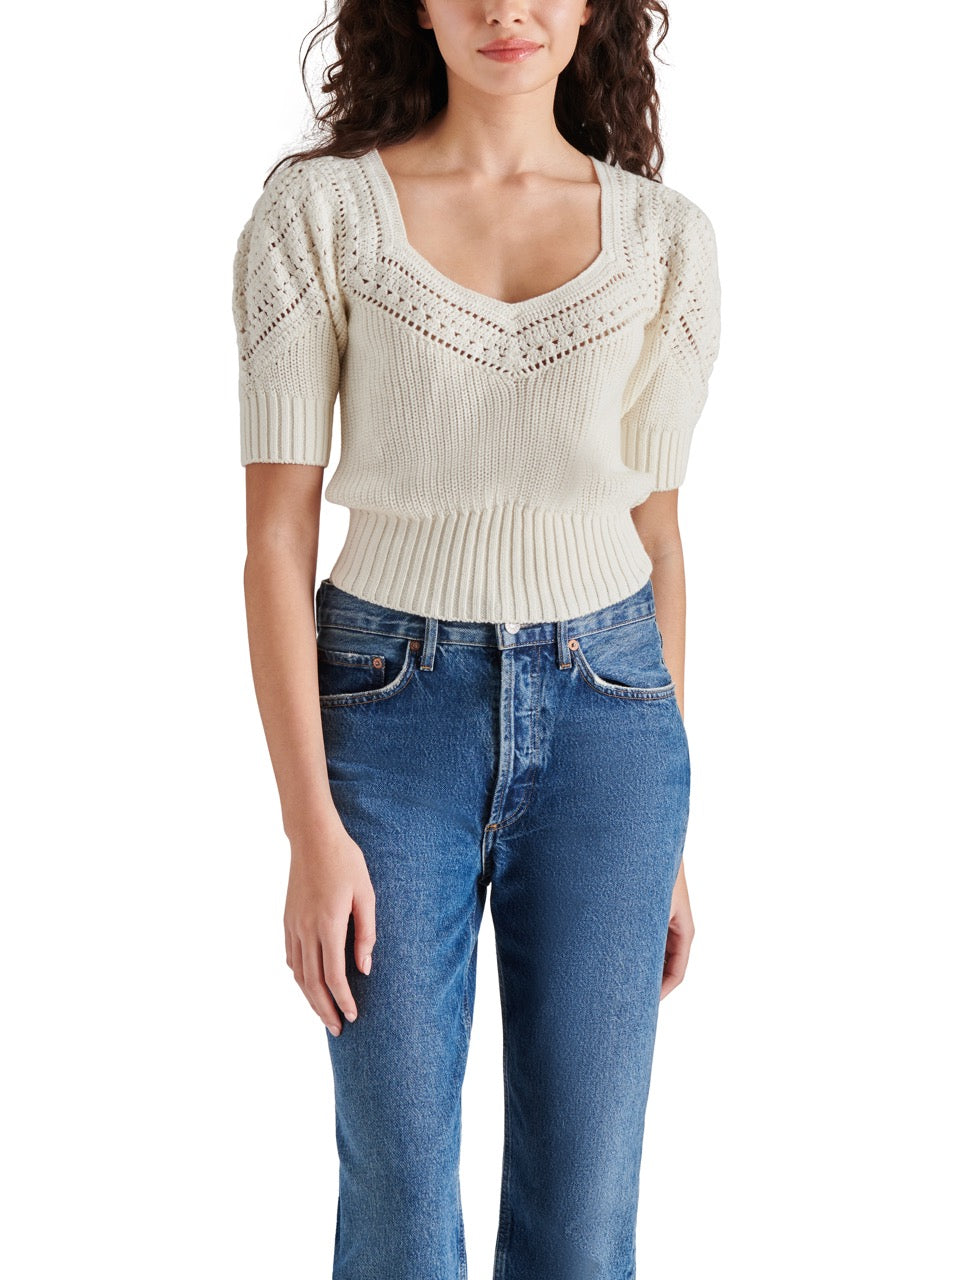 Steve Madden Darcia Short Sleeve Sweater in ivory-front view